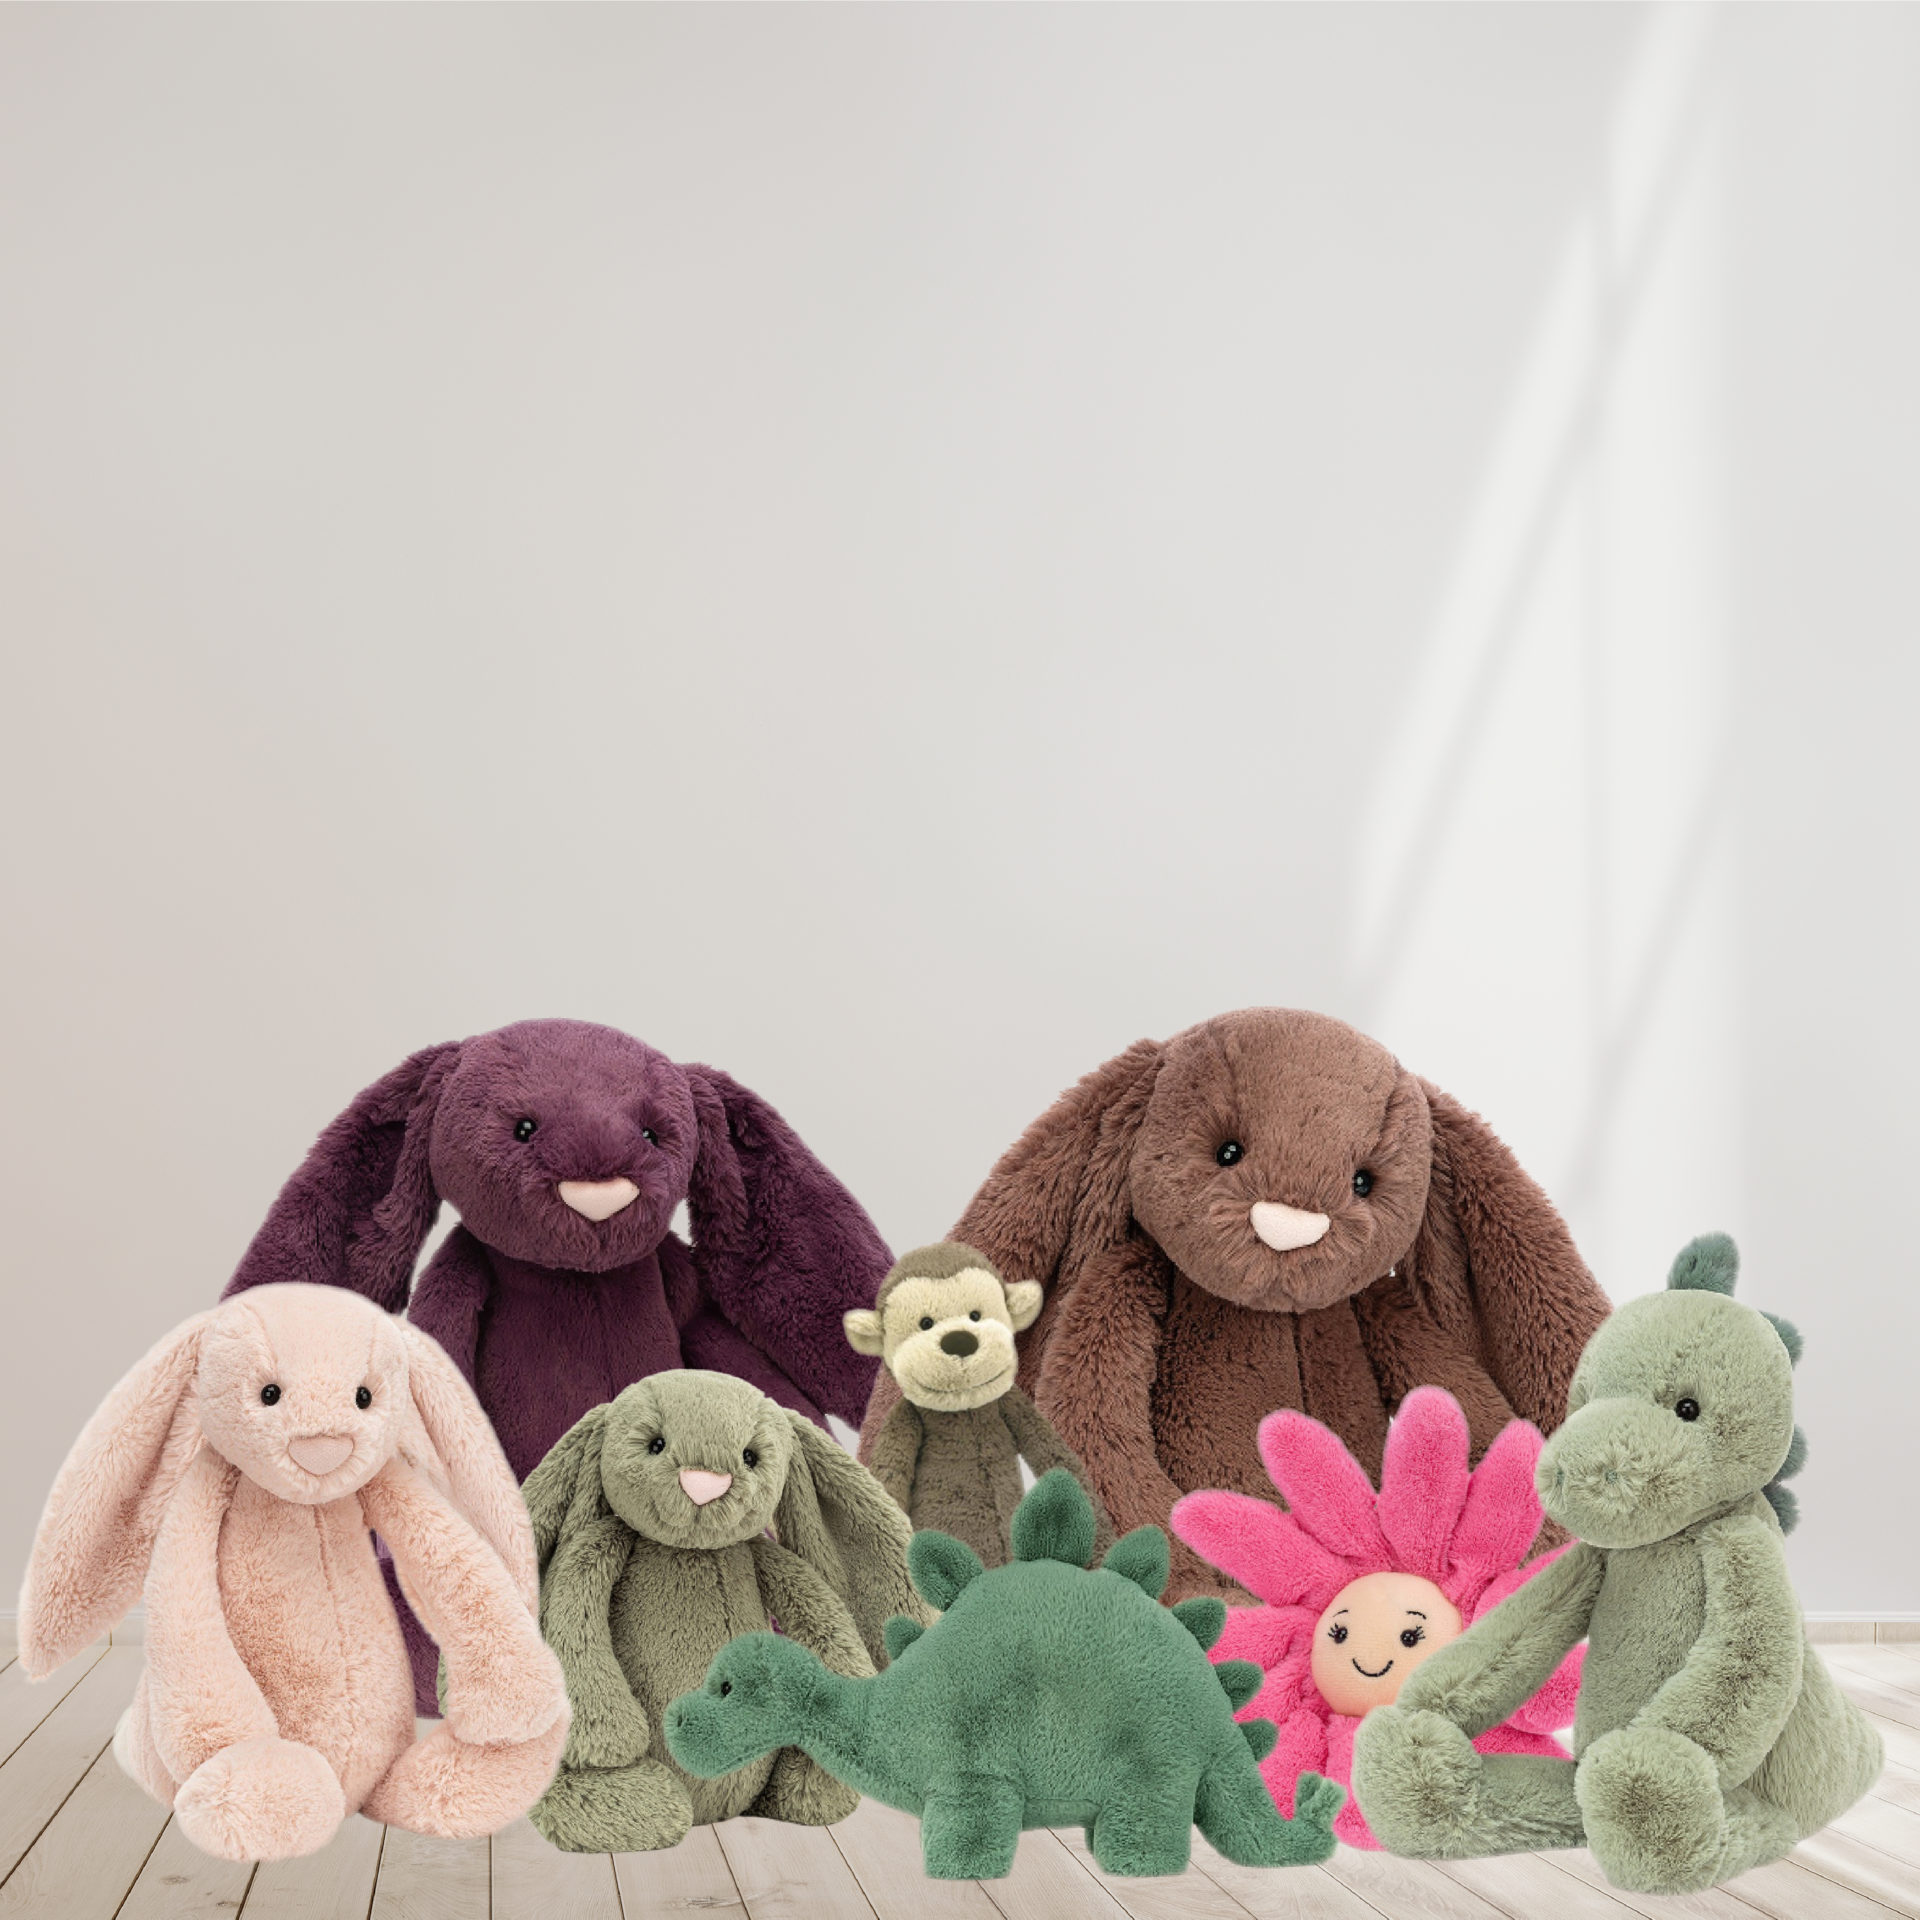 What Jellycat to choose for birthdays?